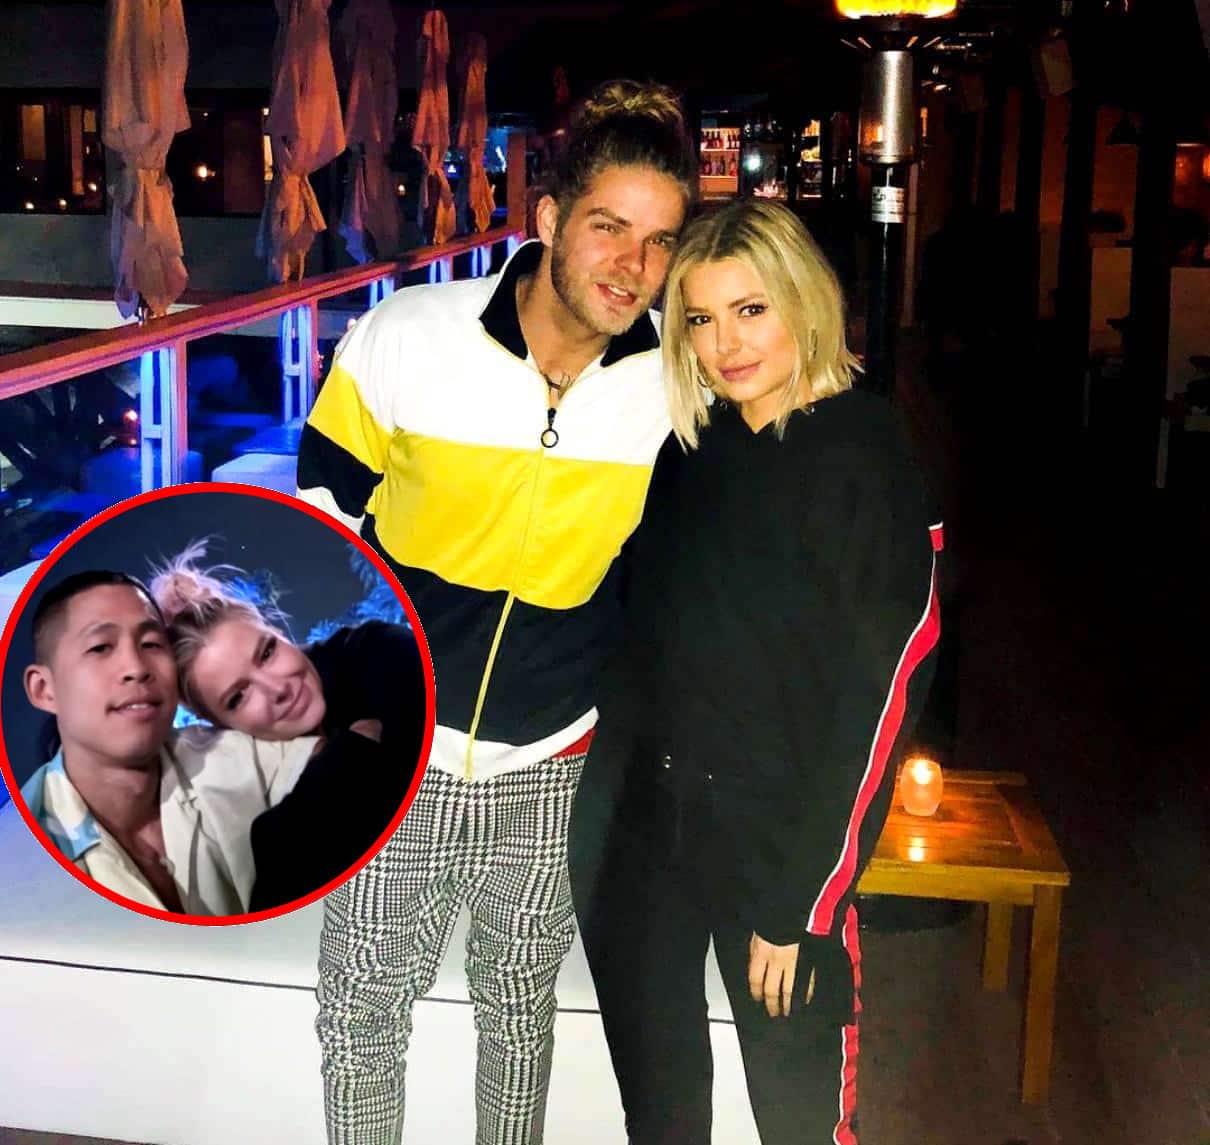 Jeremy Madix Admits He's "Side-Eyeing" Ariana Madix's Boyfriend Daniel Wai, Applauds Lala Kent for Being "Protective" Amid Vanderpump Rules Feud